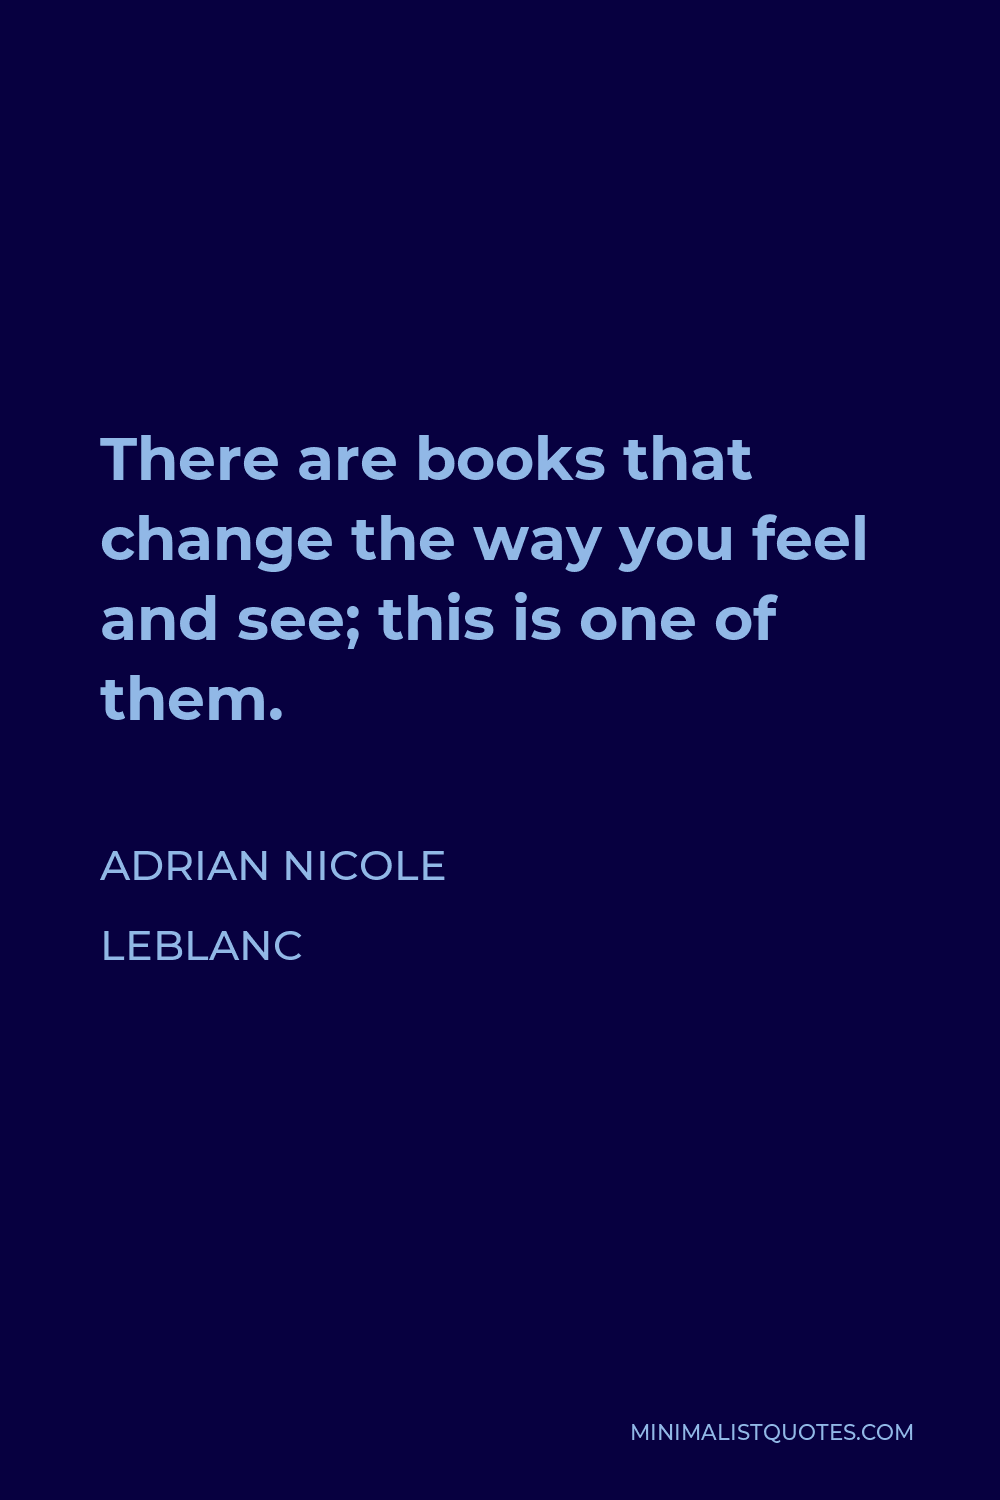 Adrian Nicole LeBlanc Quote - There are books that change the way you feel and see; this is one of them.